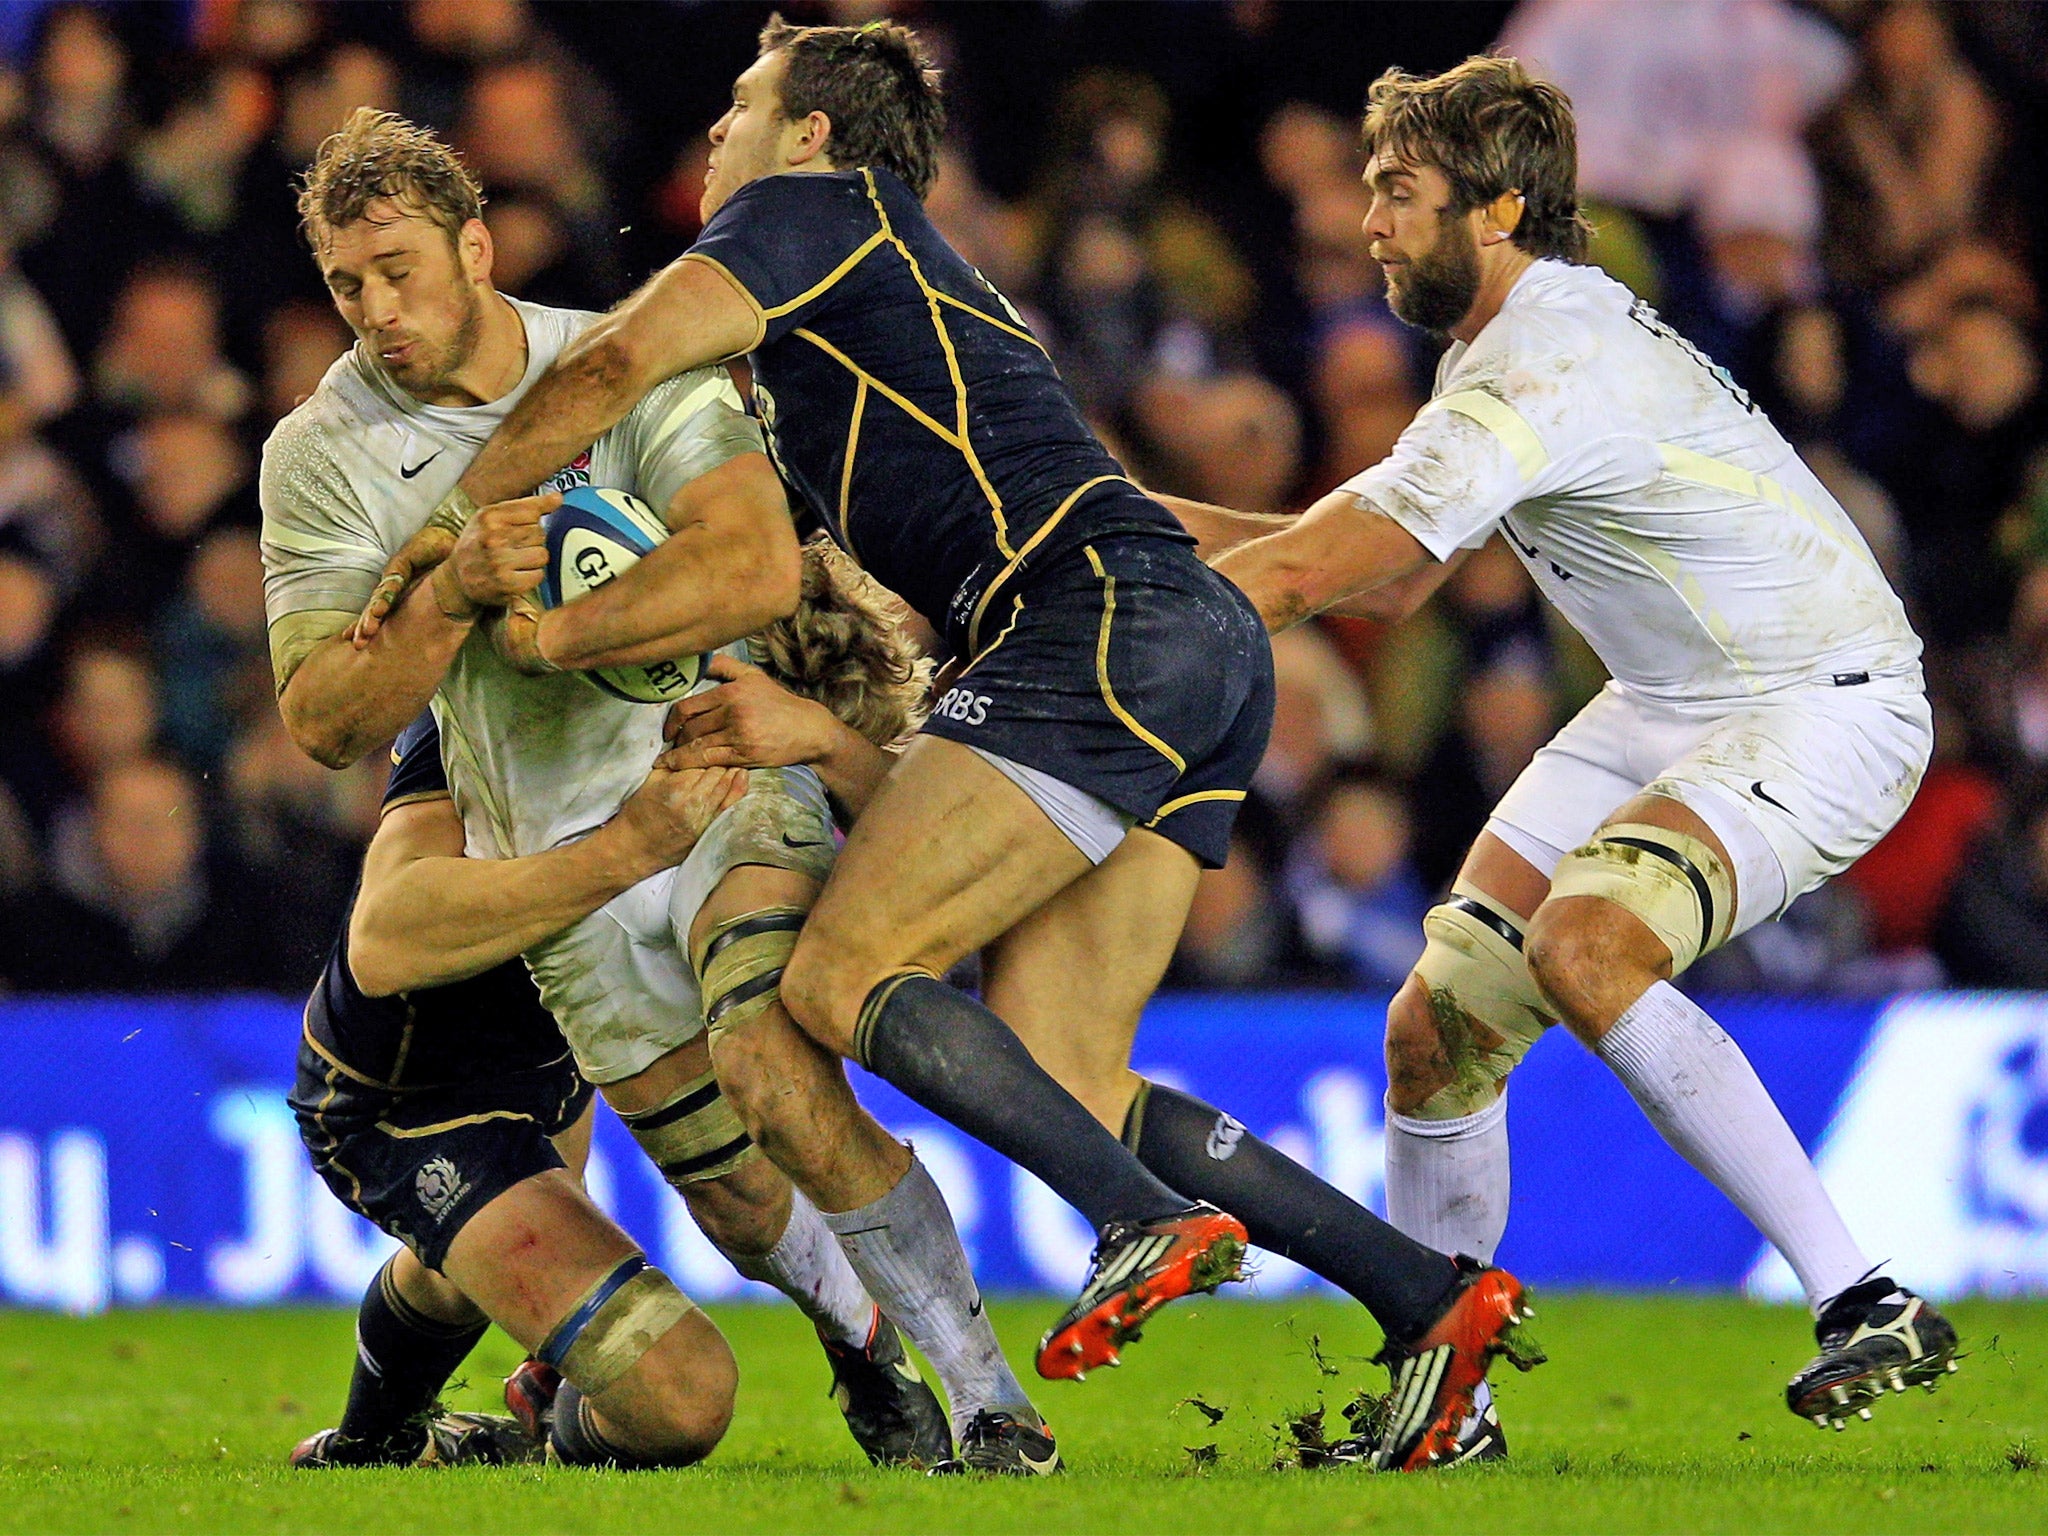 Chris Robshaw (left) enjoyed his first game as England captain at Murrayfield in 2012